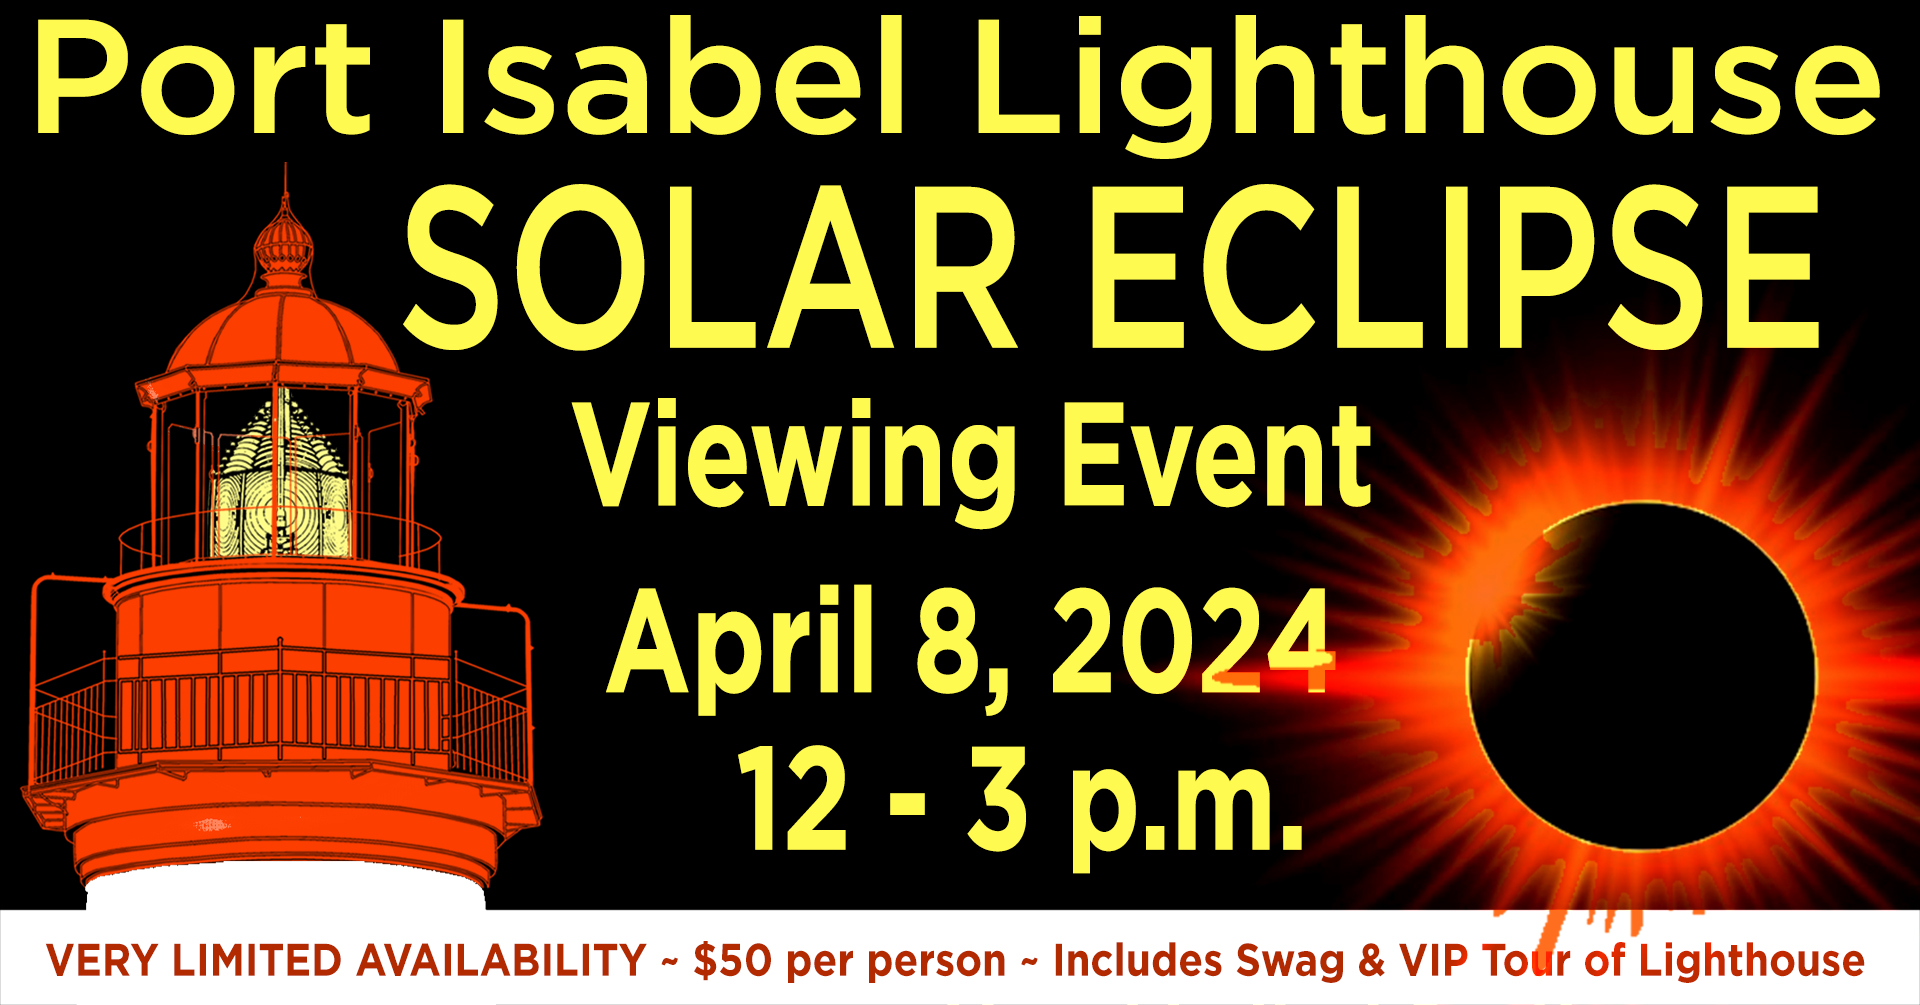 Lighthouse Solar Eclipse Viewing Event 4/8/24